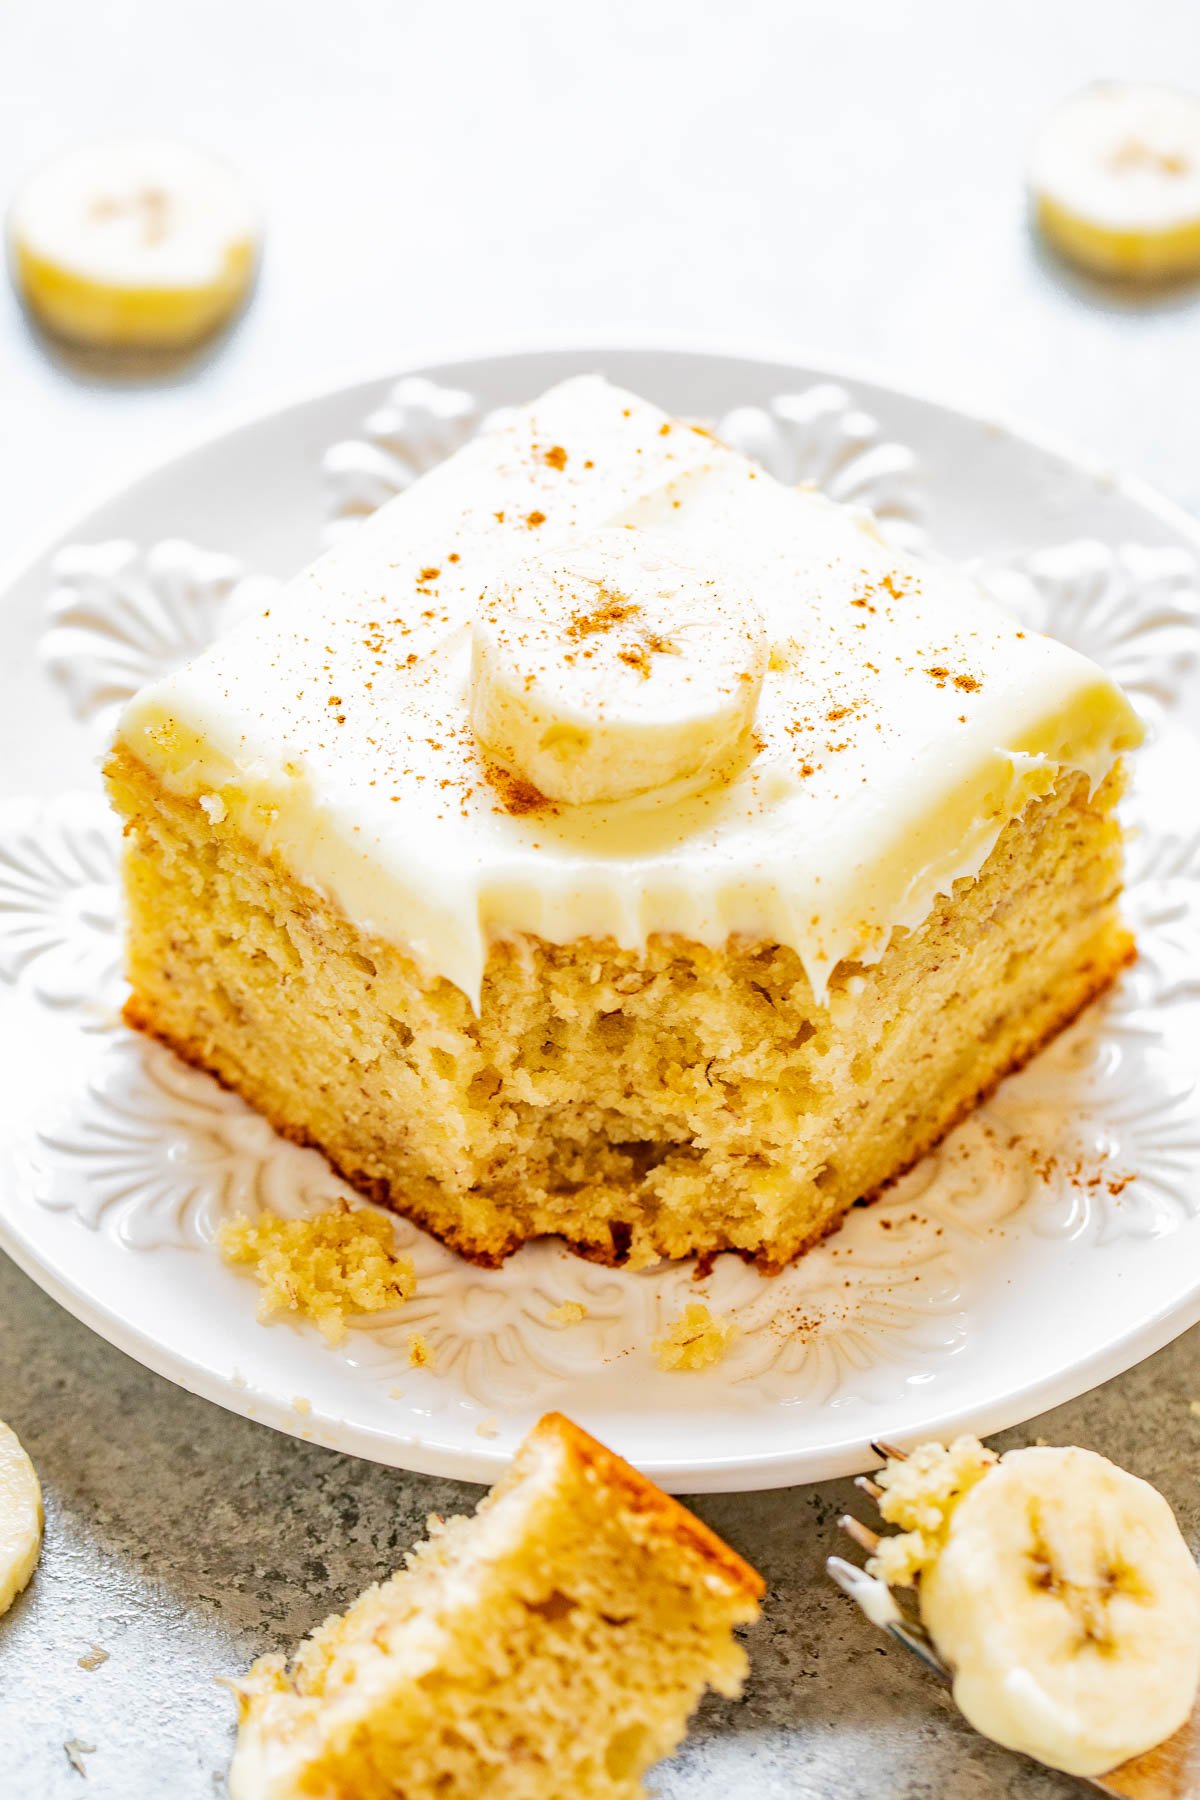 Best Banana Cake with Cream Cheese Frosting - The BEST banana cake recipe because it's soft, tender, moist, and bursting with banana flavor thanks to the 4 bananas used! Tangy-yet-sweet cream cheese frosting takes this cake over the top and makes it a guaranteed family FAVORITE! Fast and easy to make!